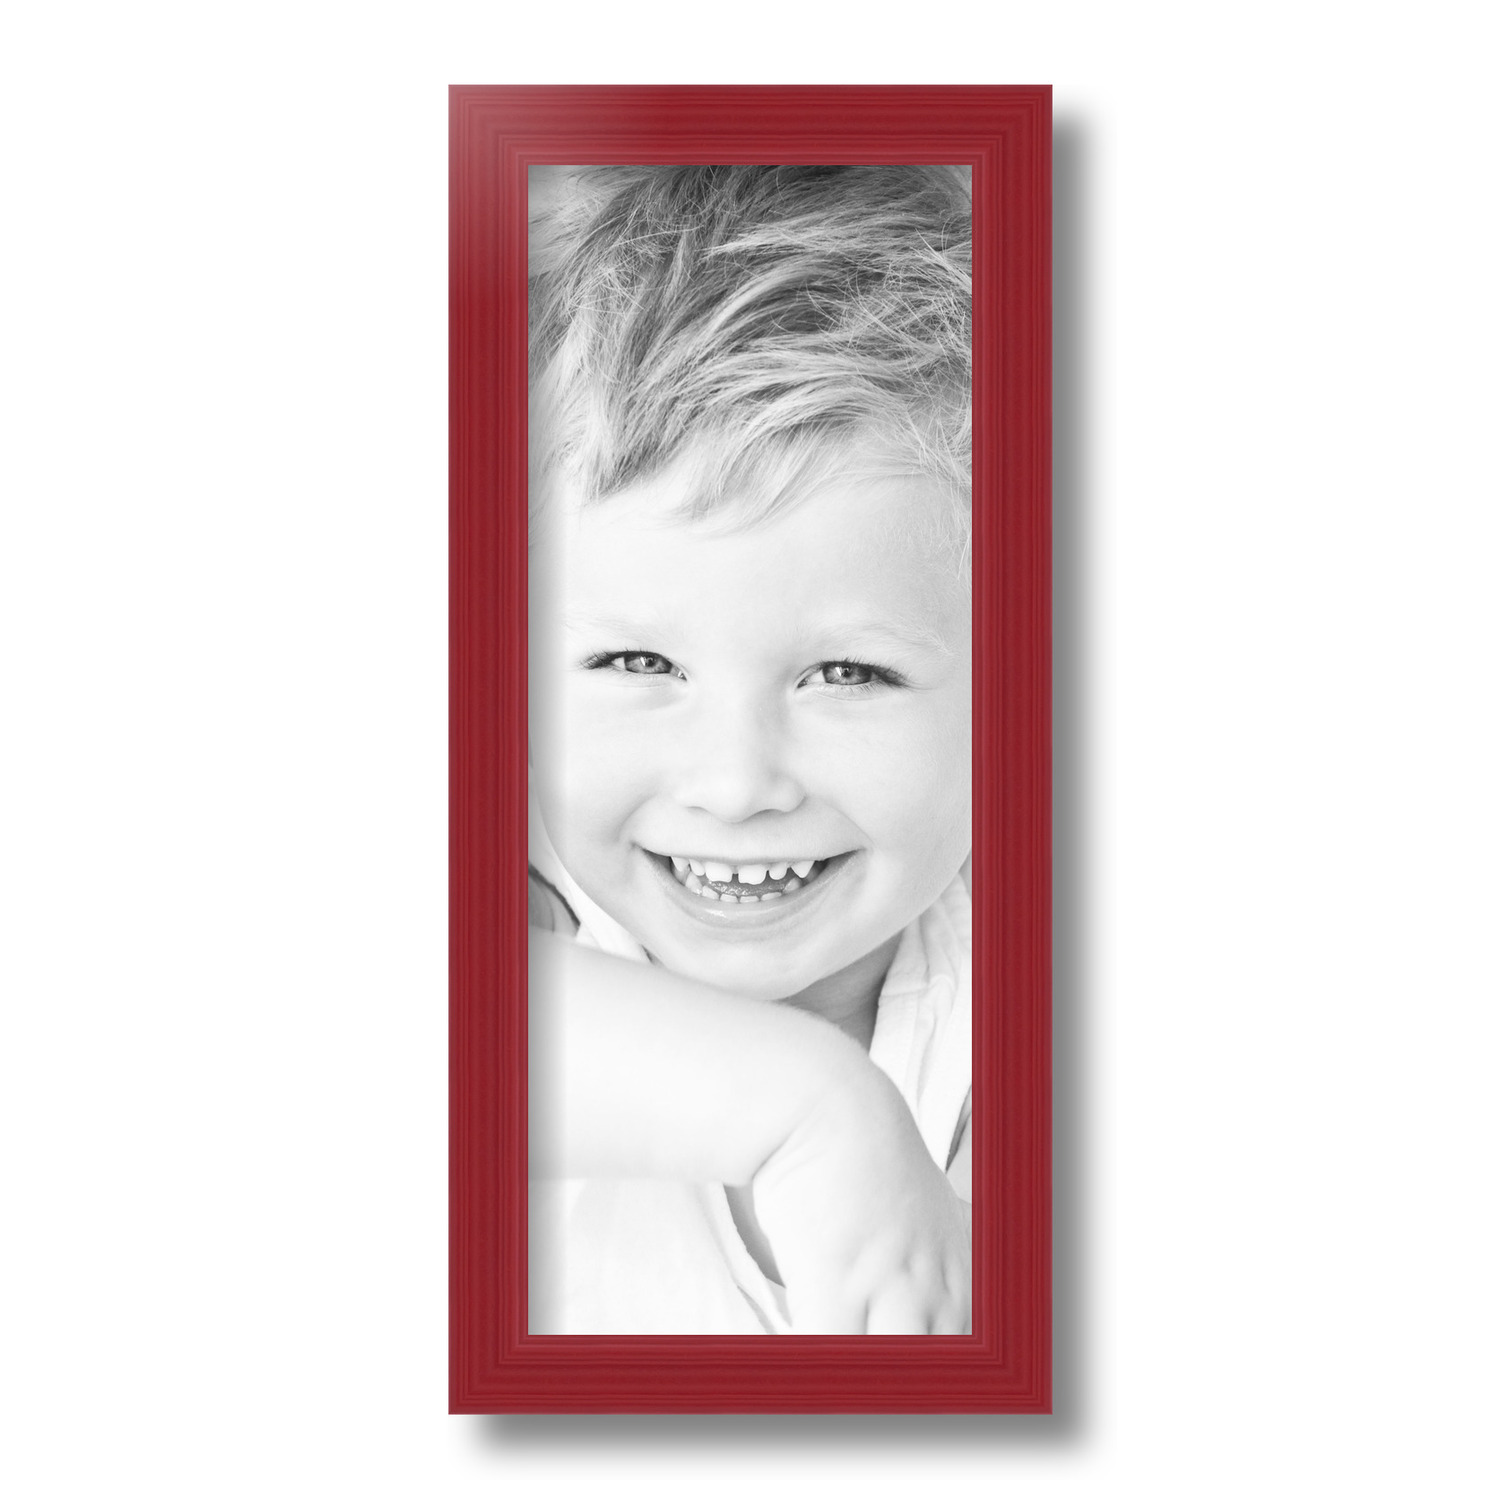 ArtToFrames 6x15 inch Red Picture Frame, Red Wood Poster Frame (4155), Size: 6 x 15